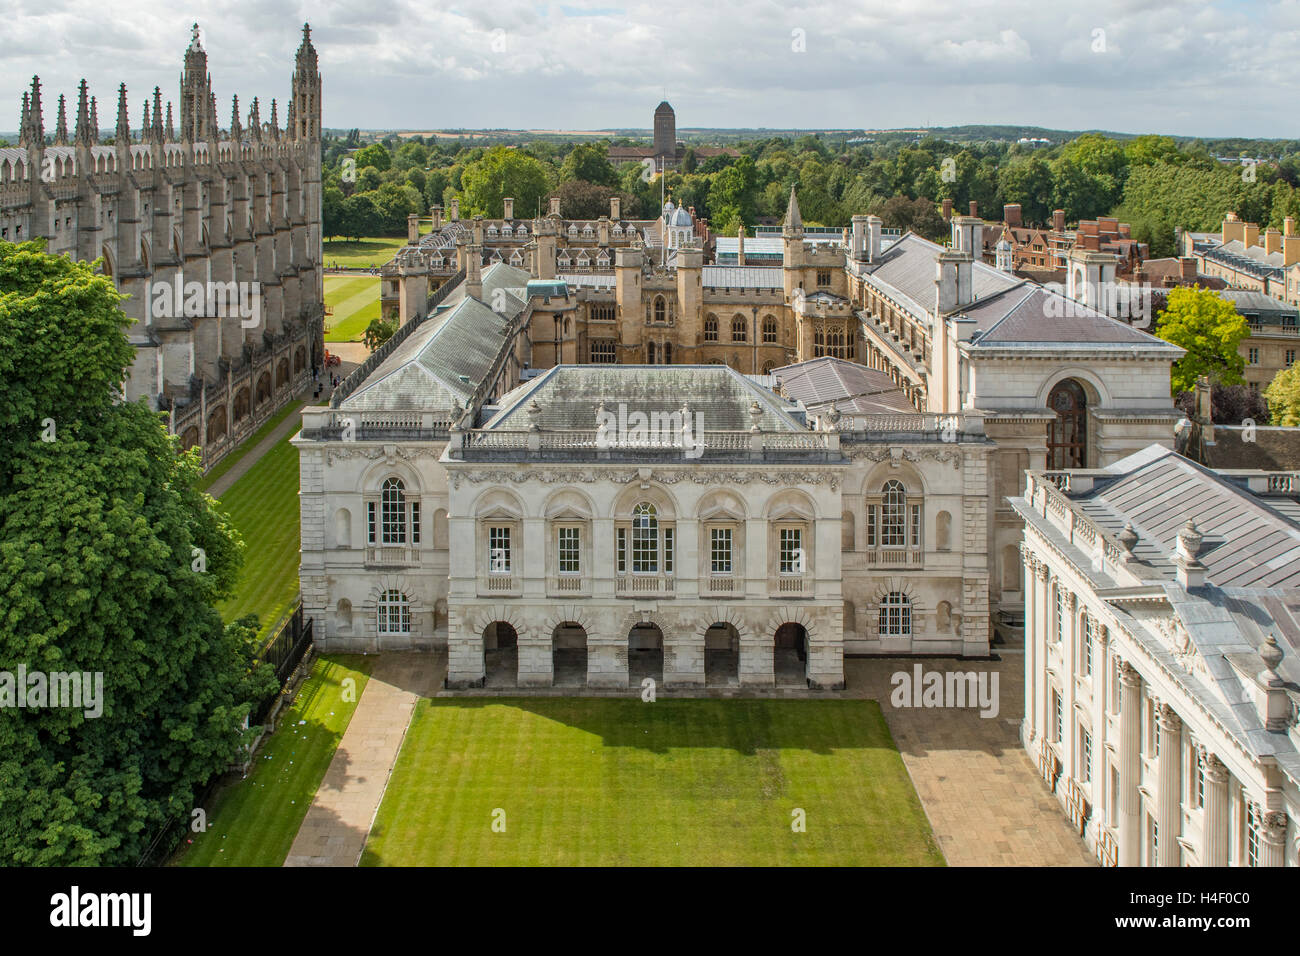 Old Schools and Senate Building from St Mary's Tower, Cambridge, Cambridgeshire, England Stock Photo